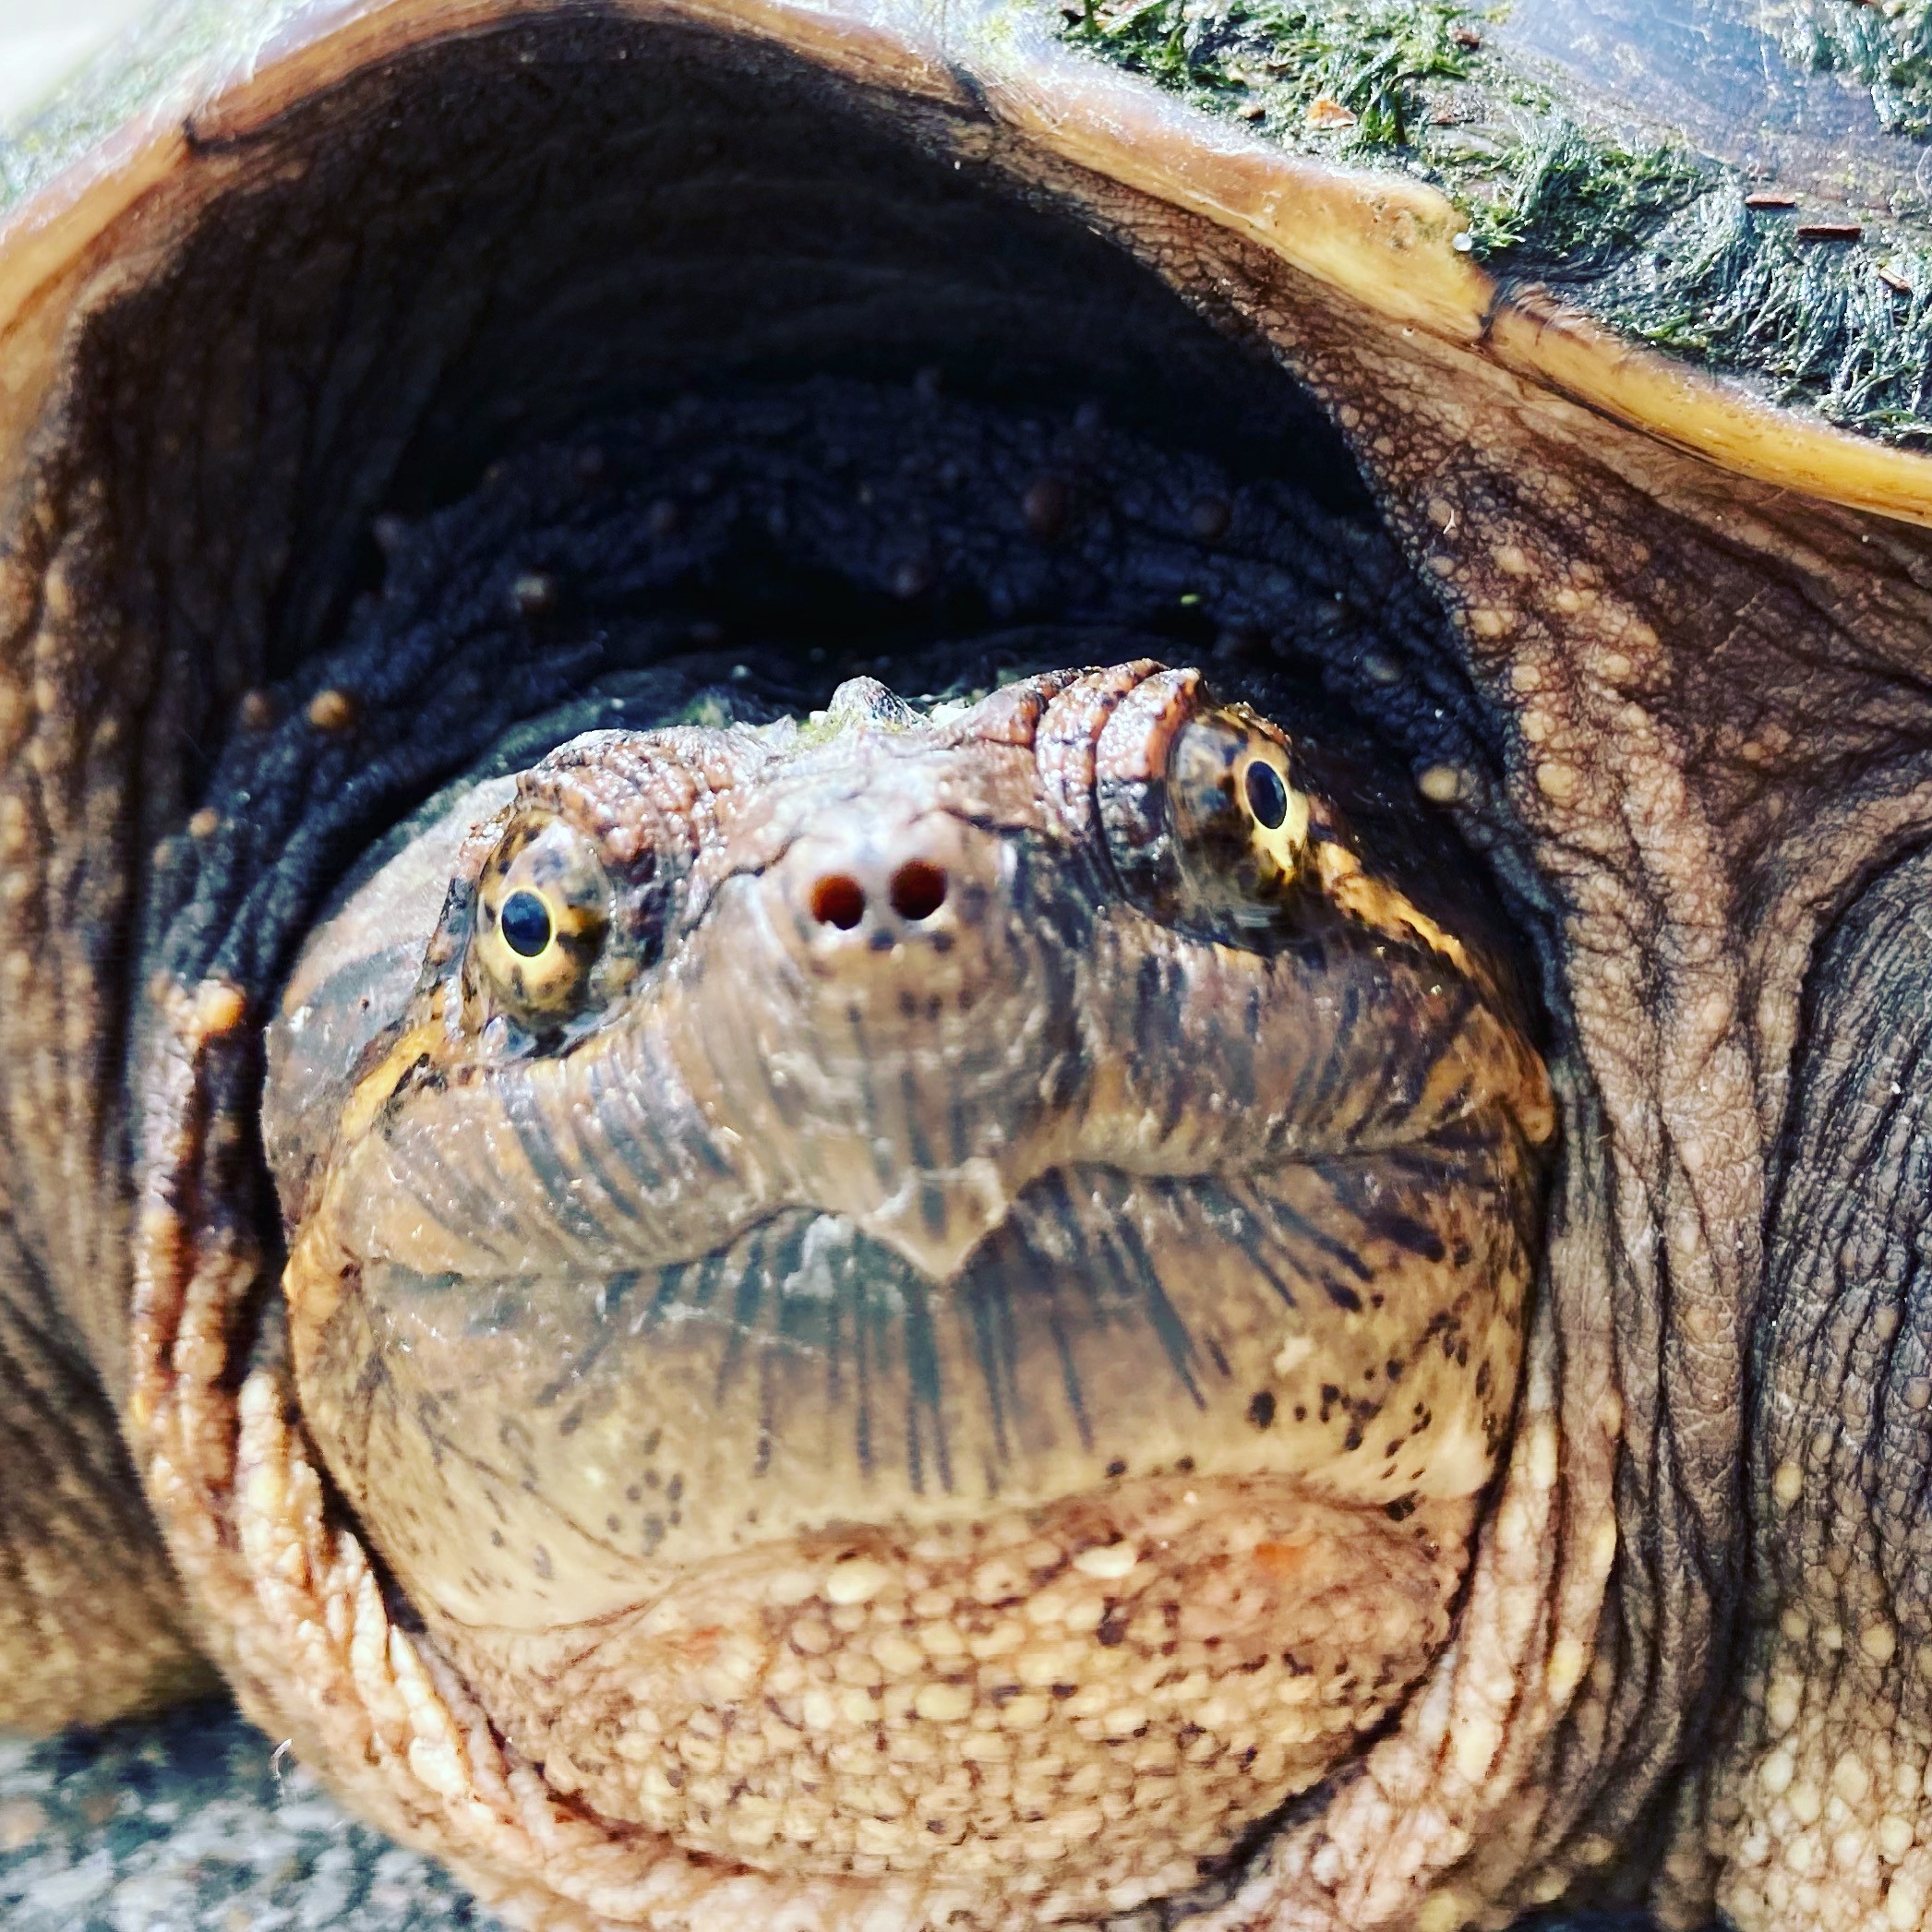 Snapping Turtle 1